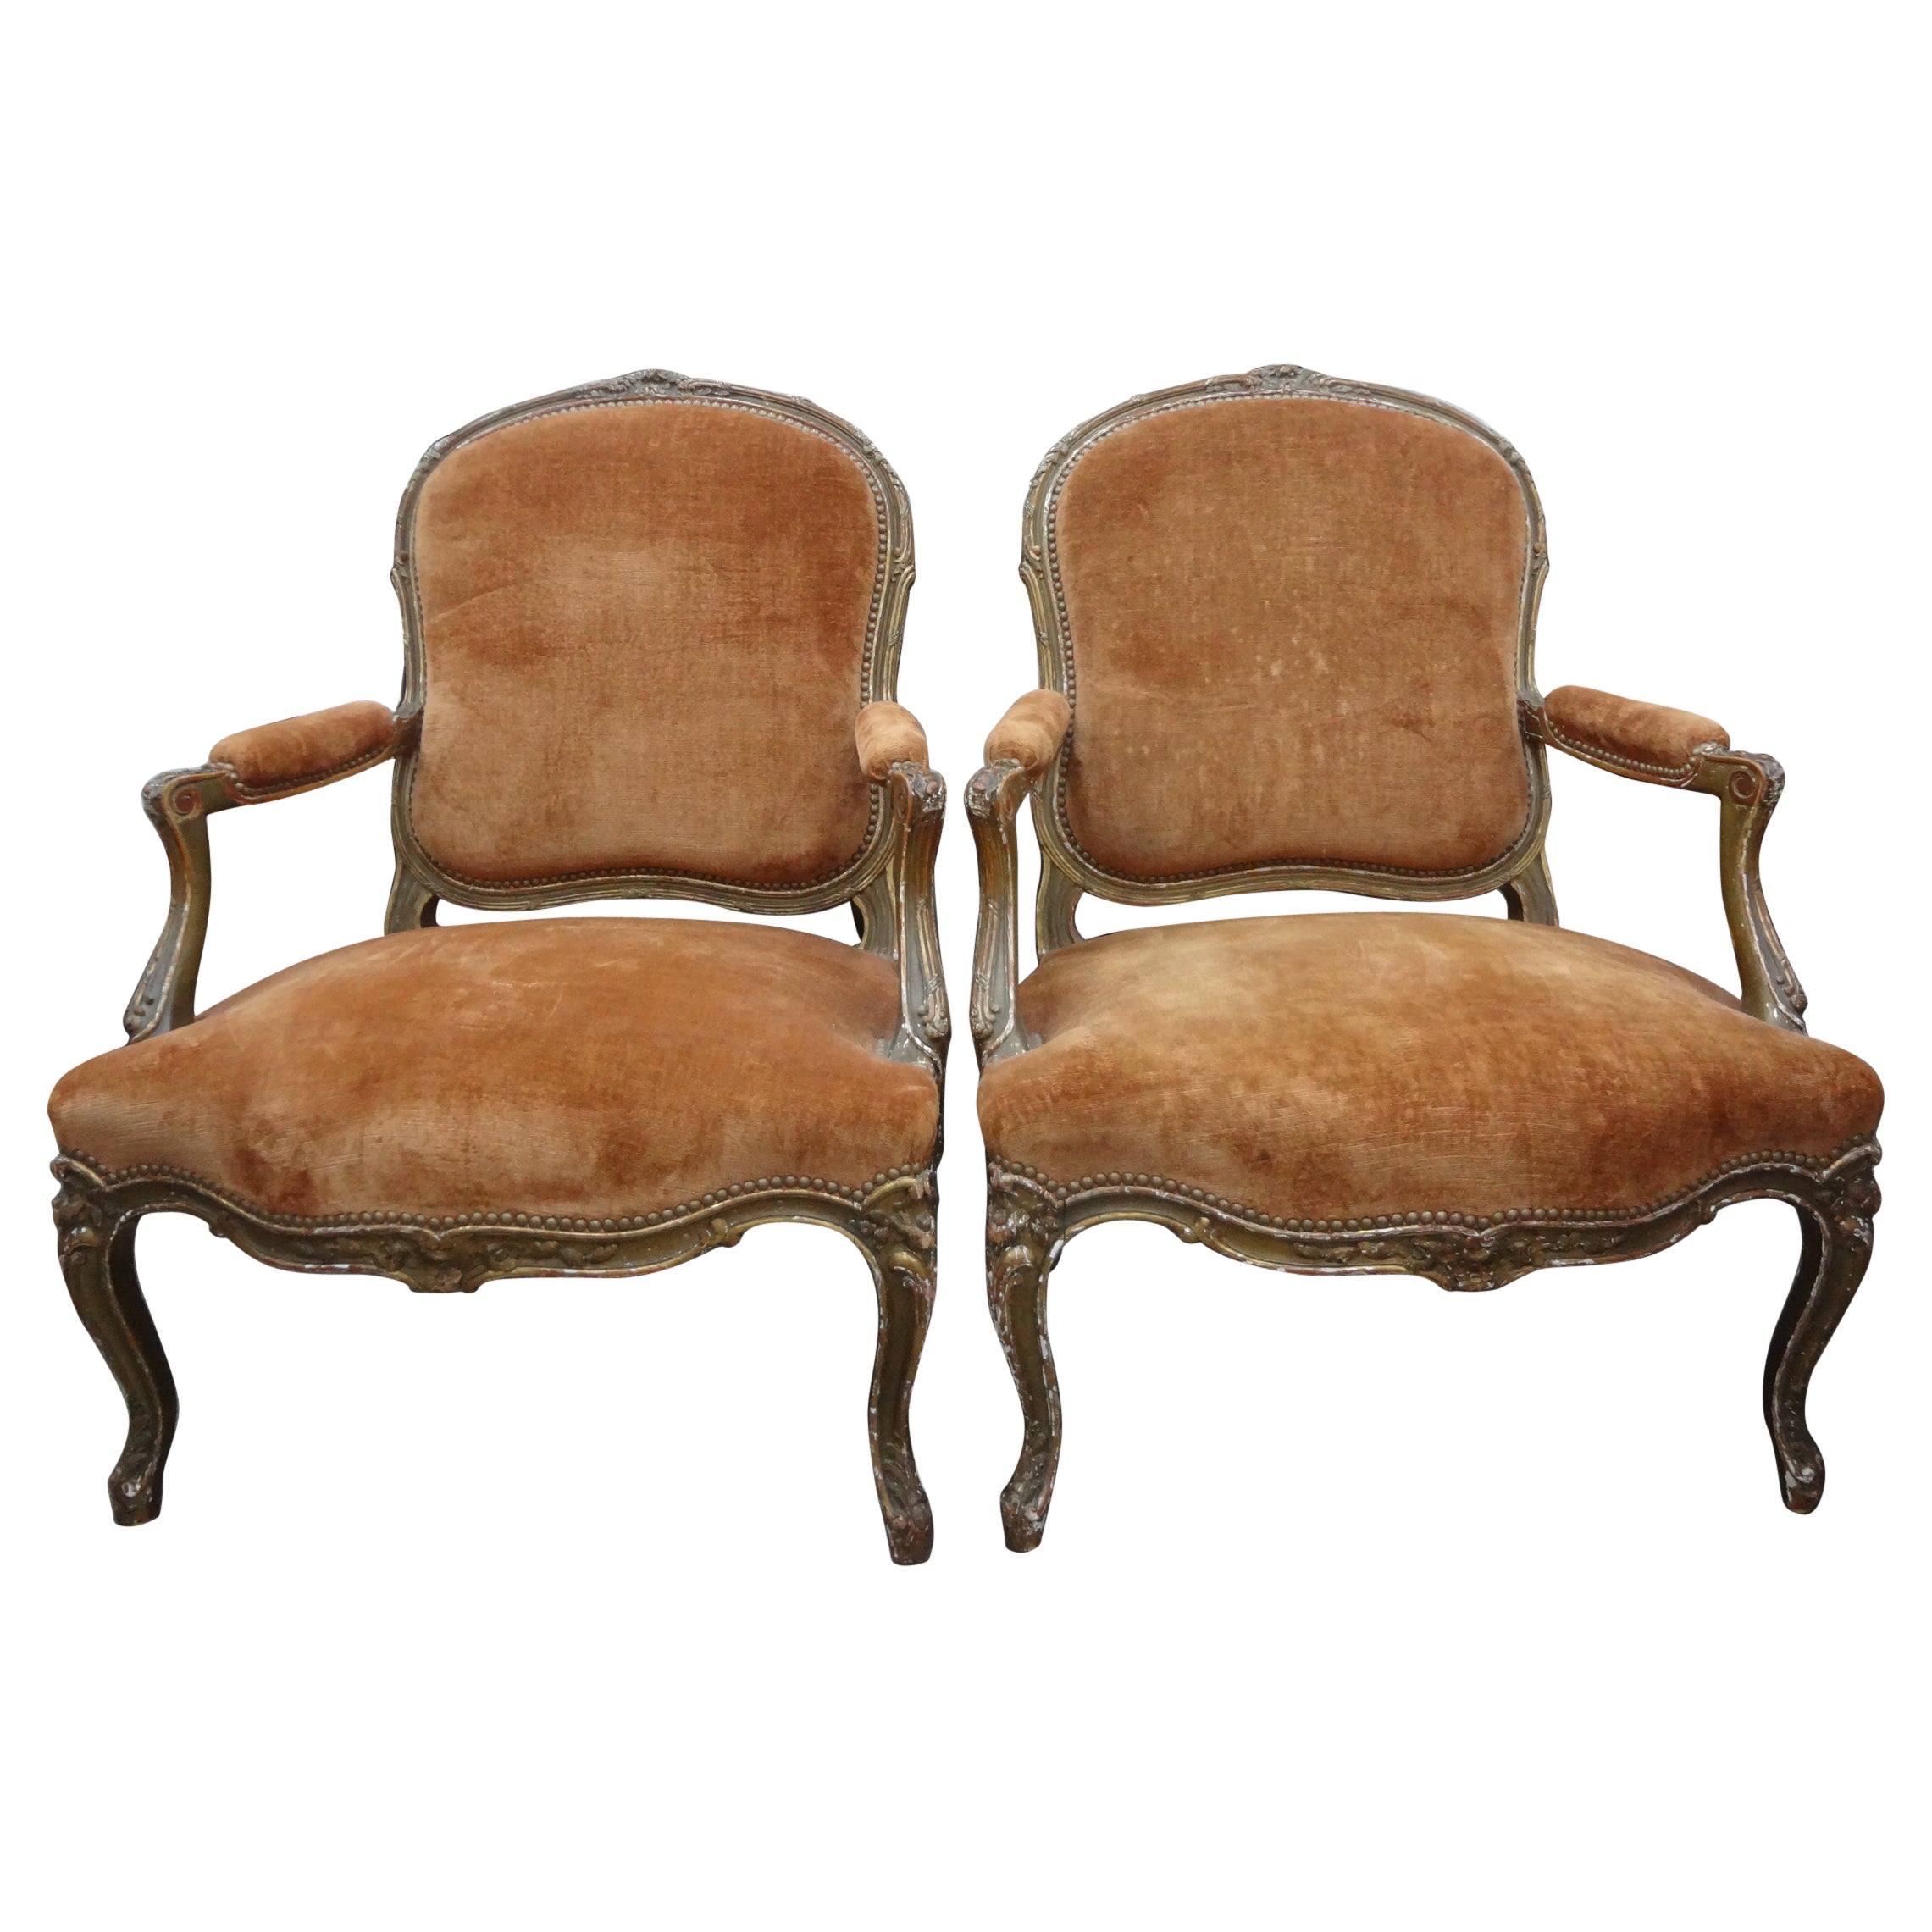 Pair of 19th Century French Louis XV Style Giltwood Chairs For Sale